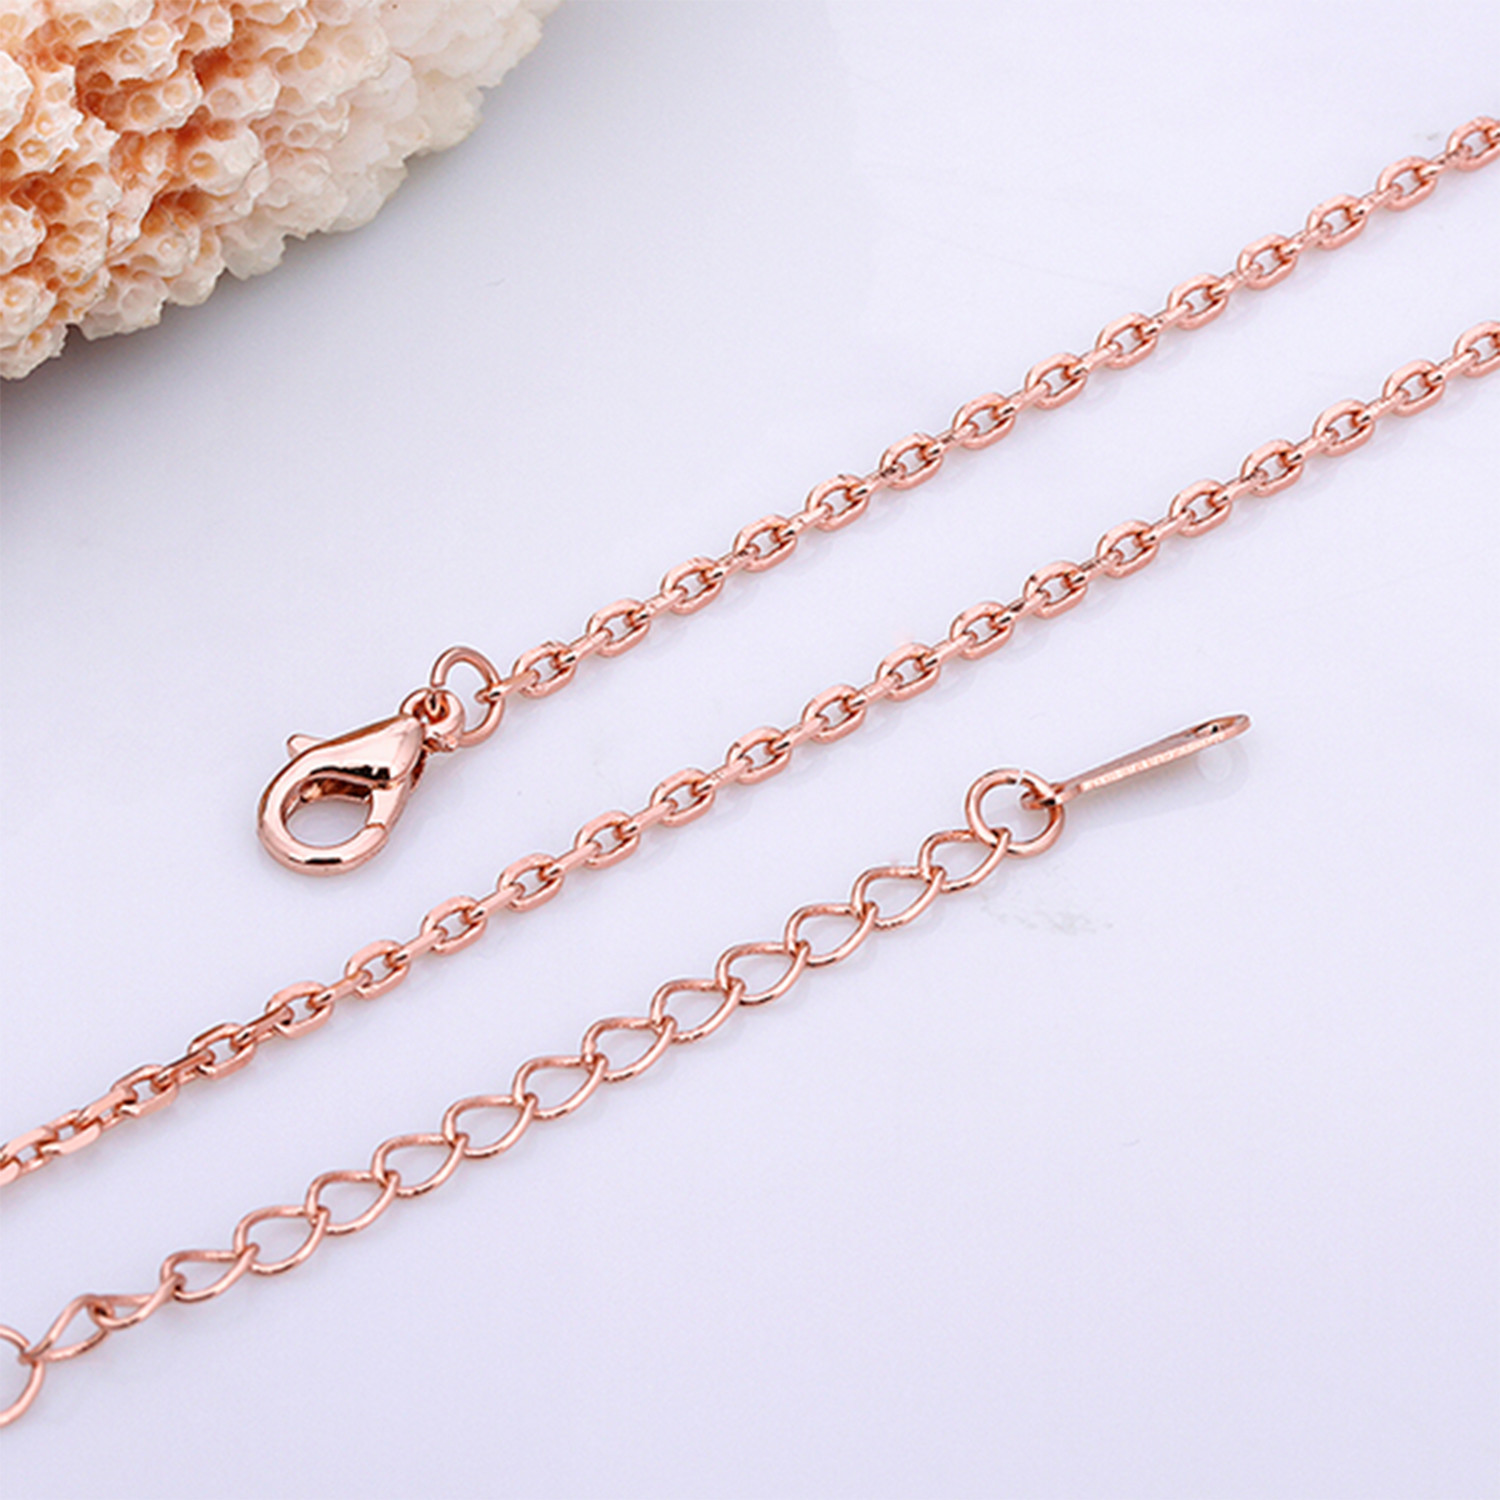 Italian Curb Chain Necklace // 14K Rose Gold Plated - Rubique Jewelry ...